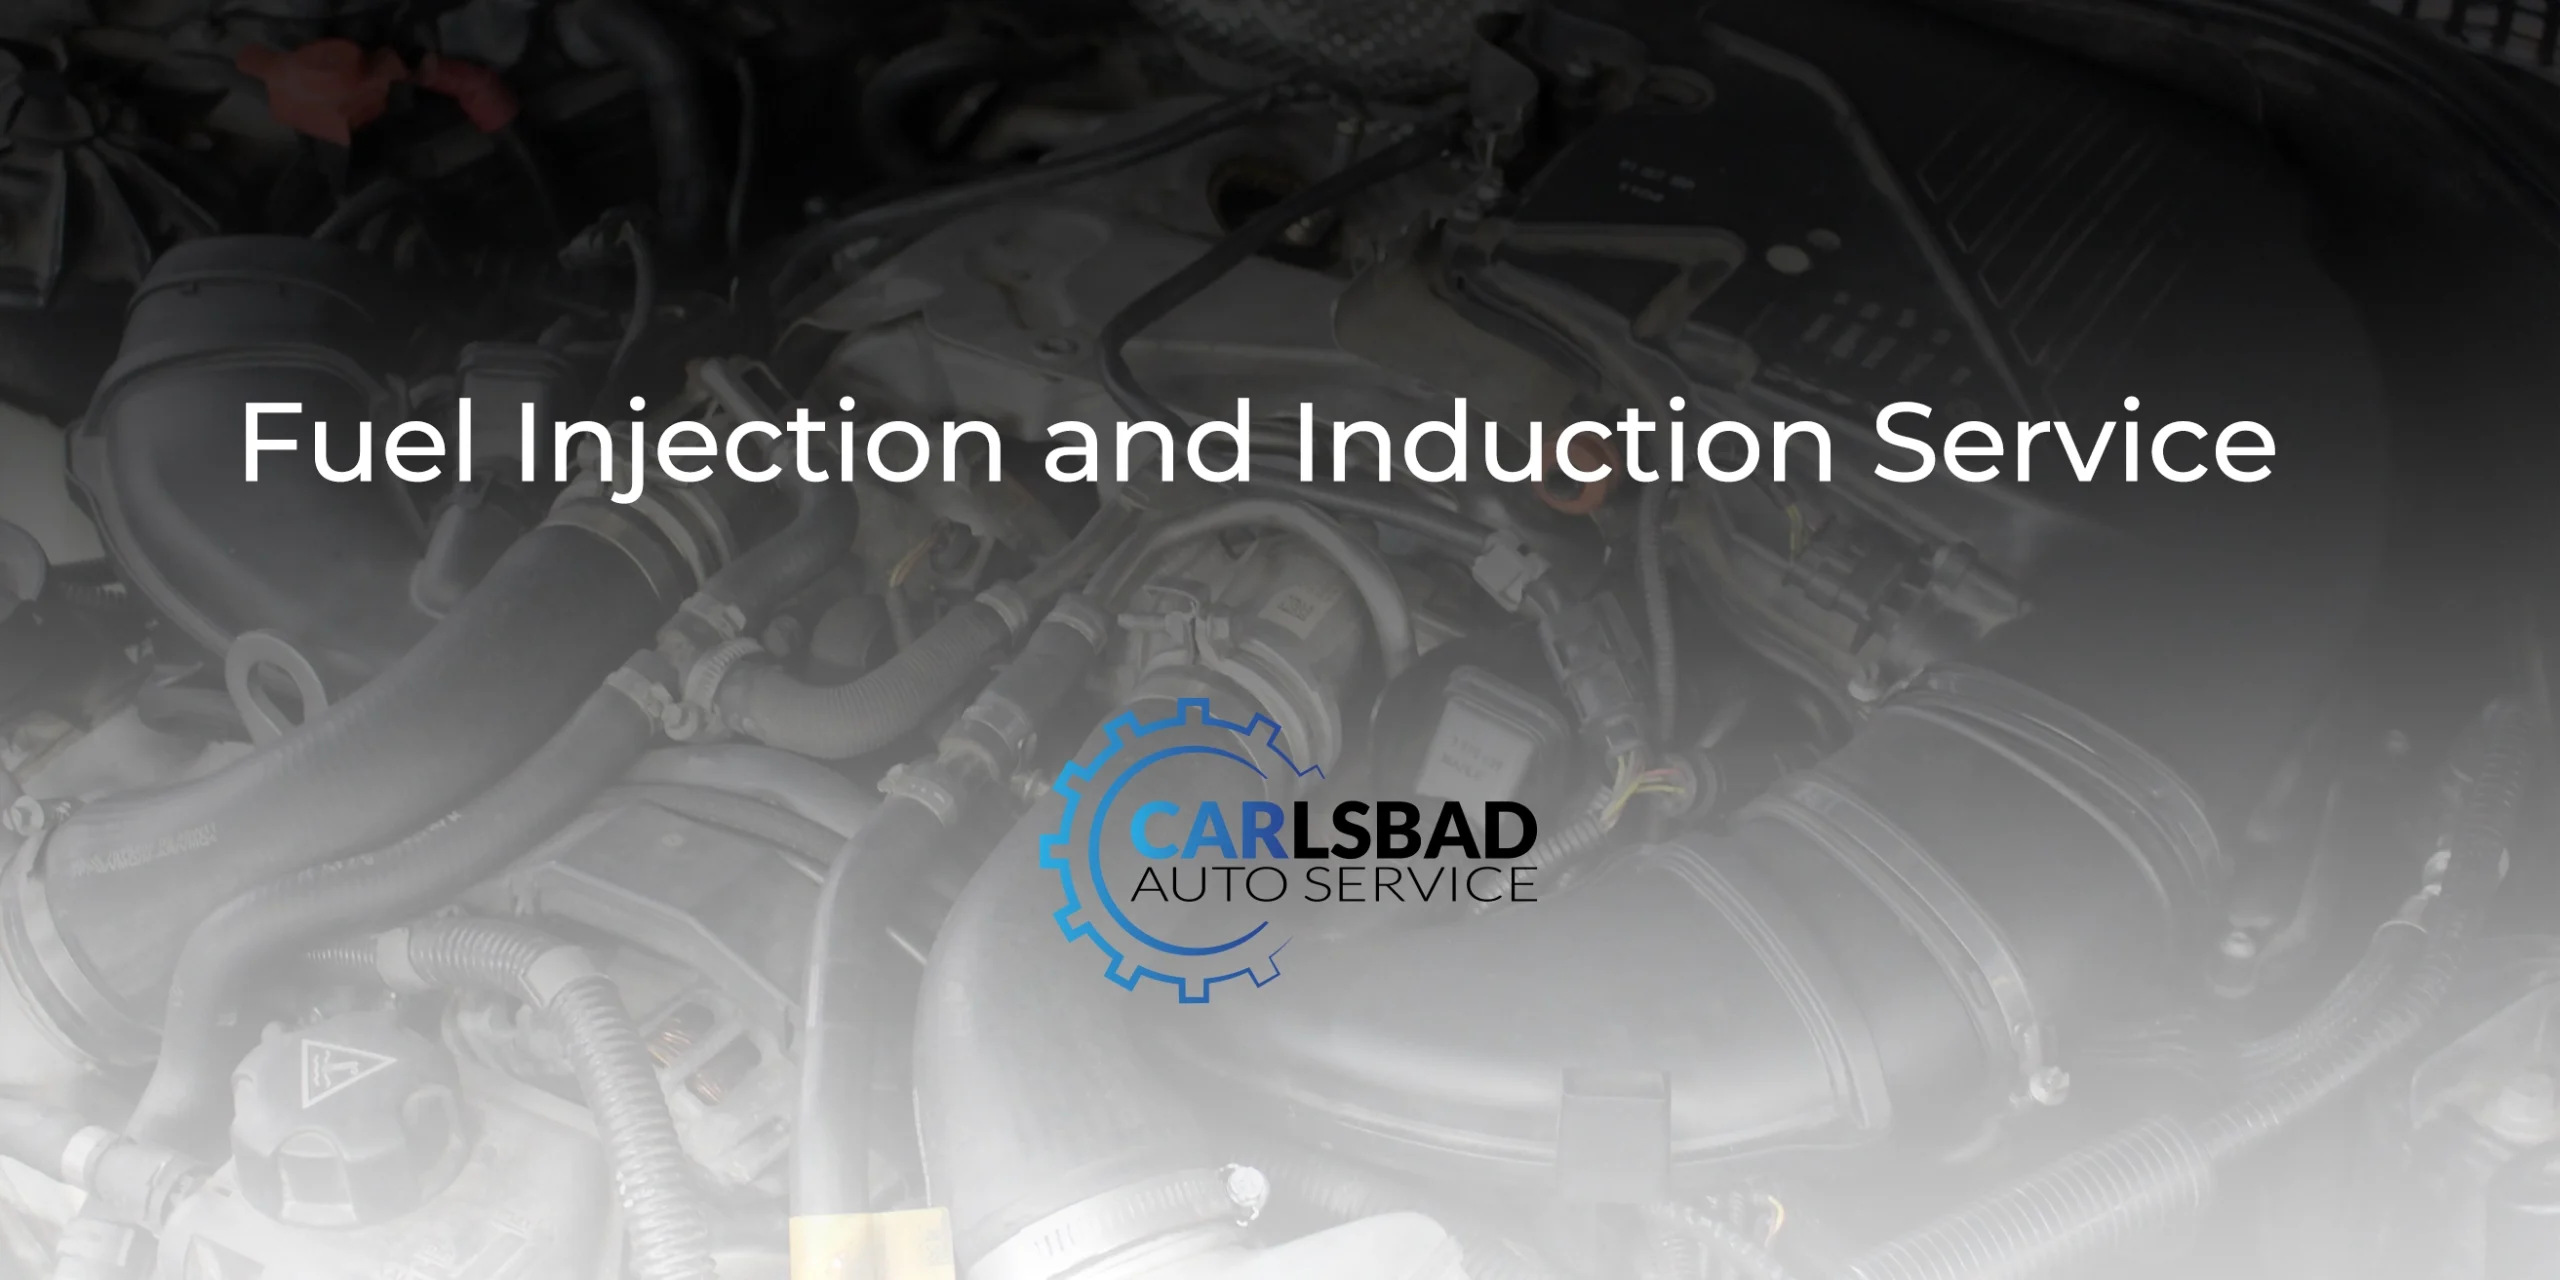 Fuel Injection and Induction Service